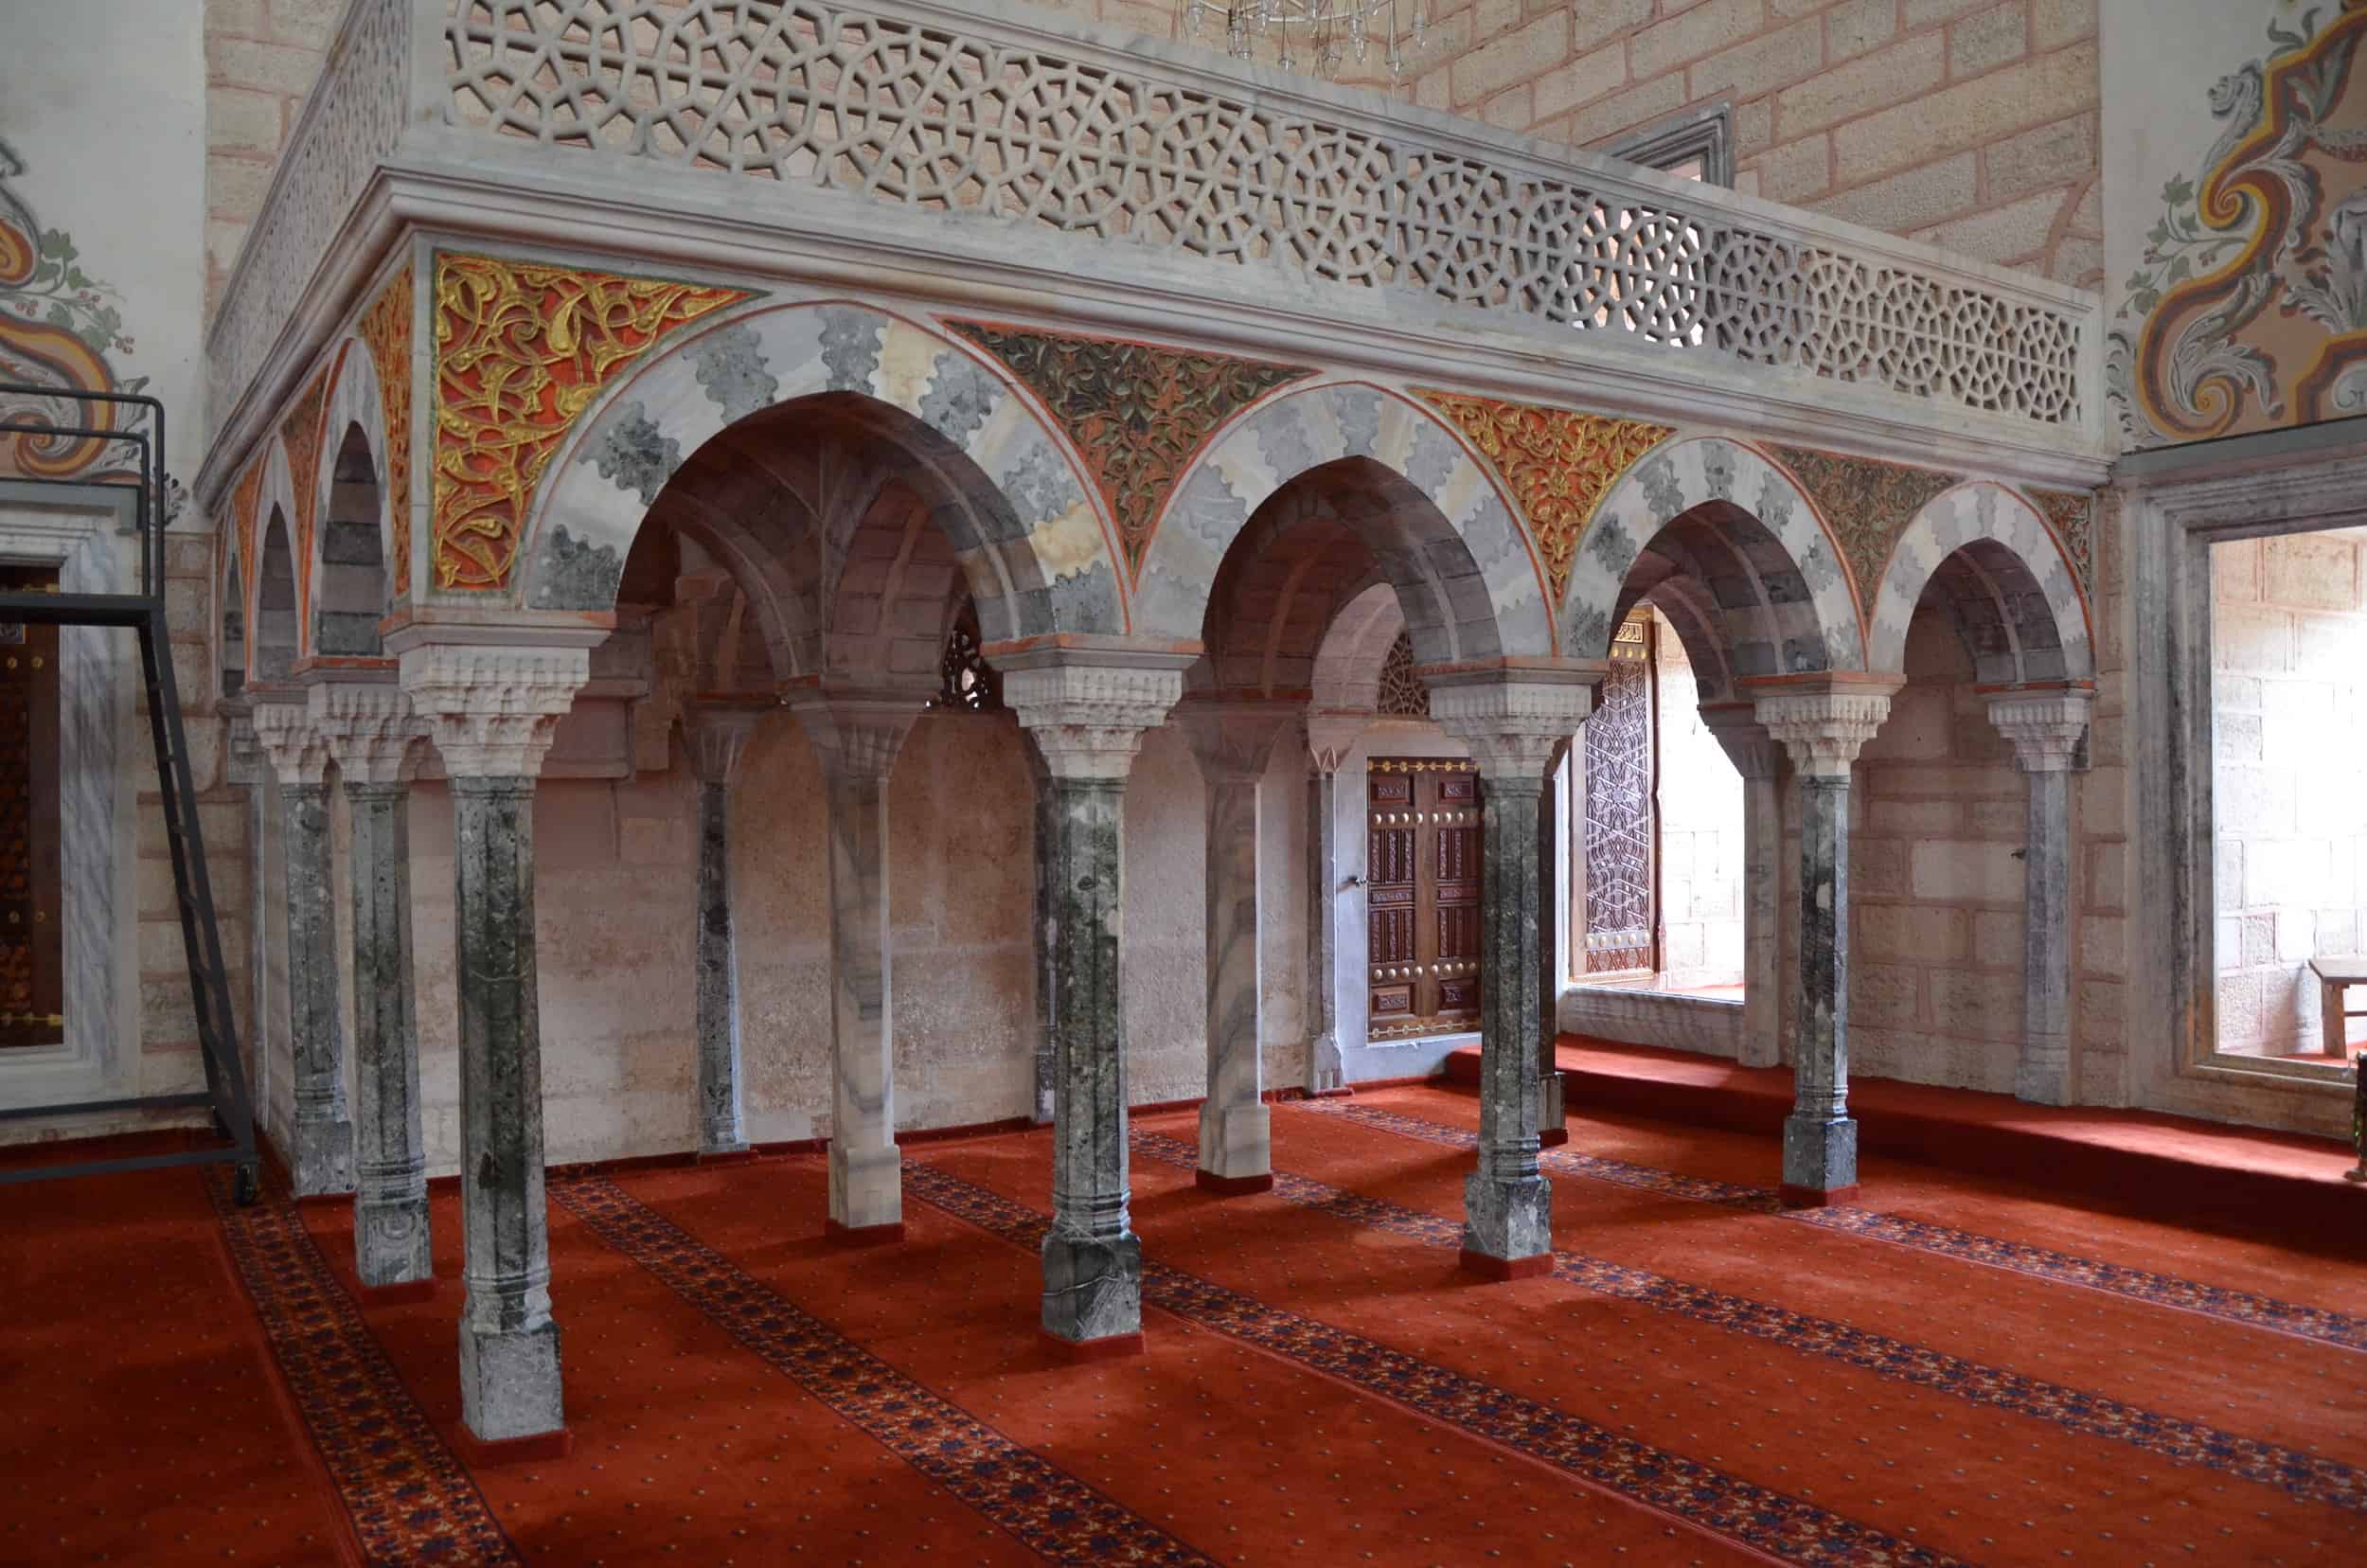 Sultan's gallery at the Bayezid II Mosque